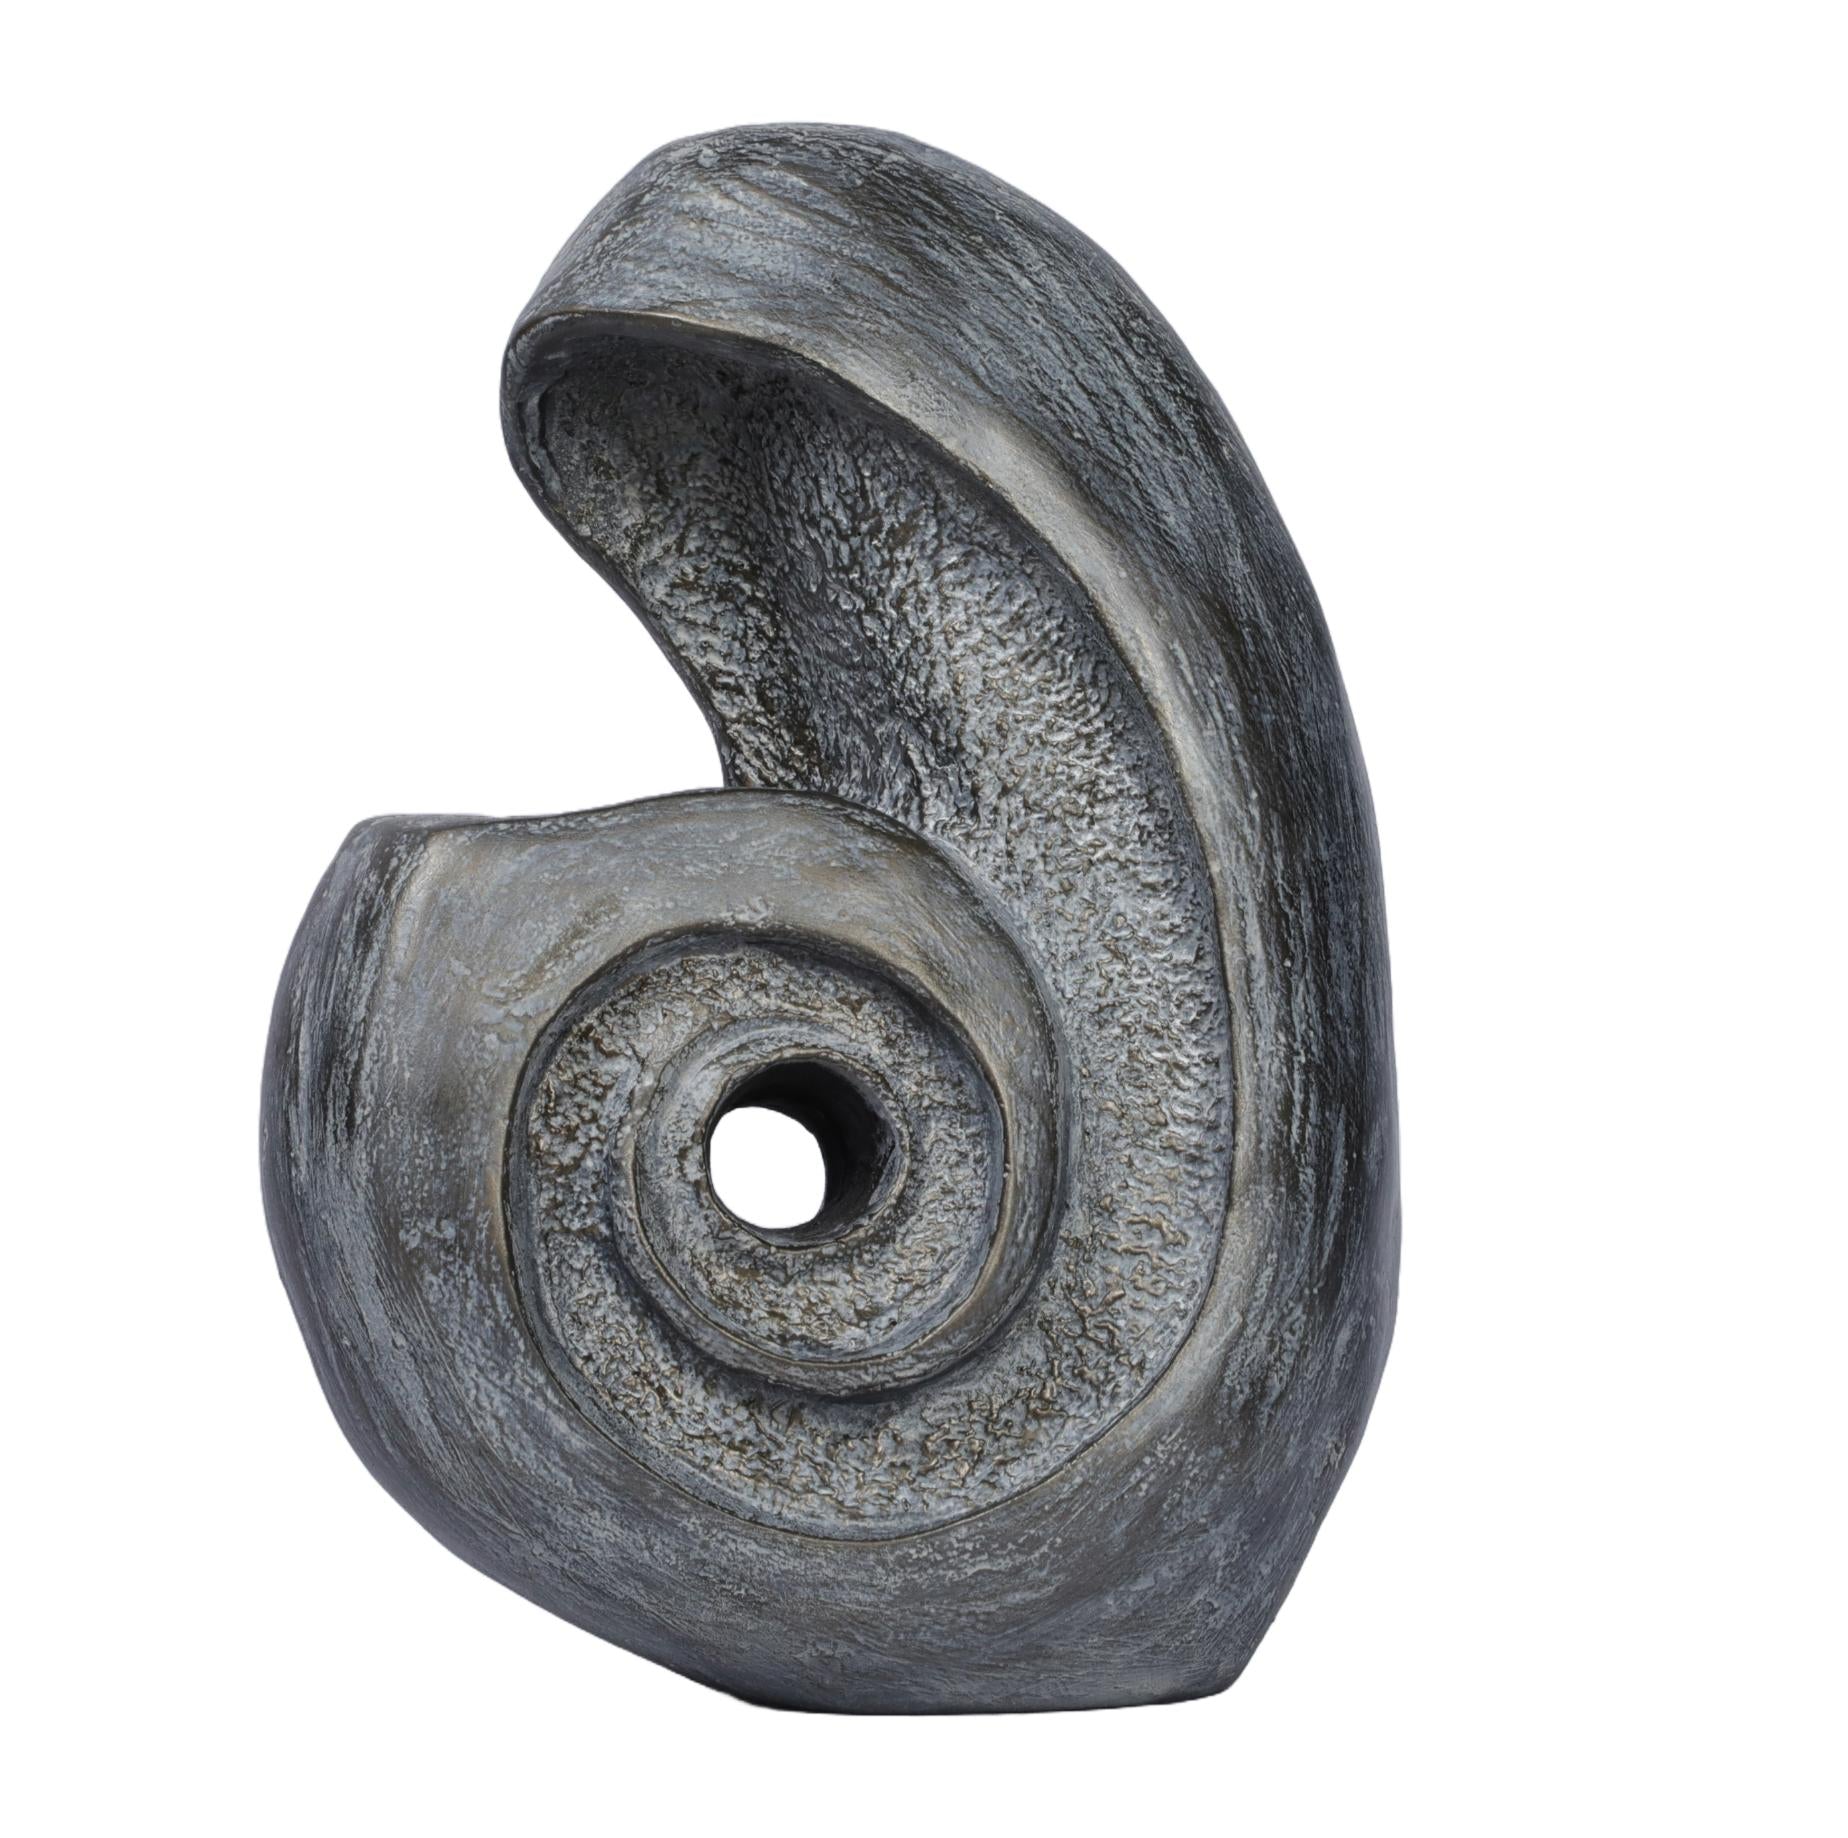 Ashnam Abstract  Modern Swirling Sculpture with Central Void - Rust Iron, 25 Cm